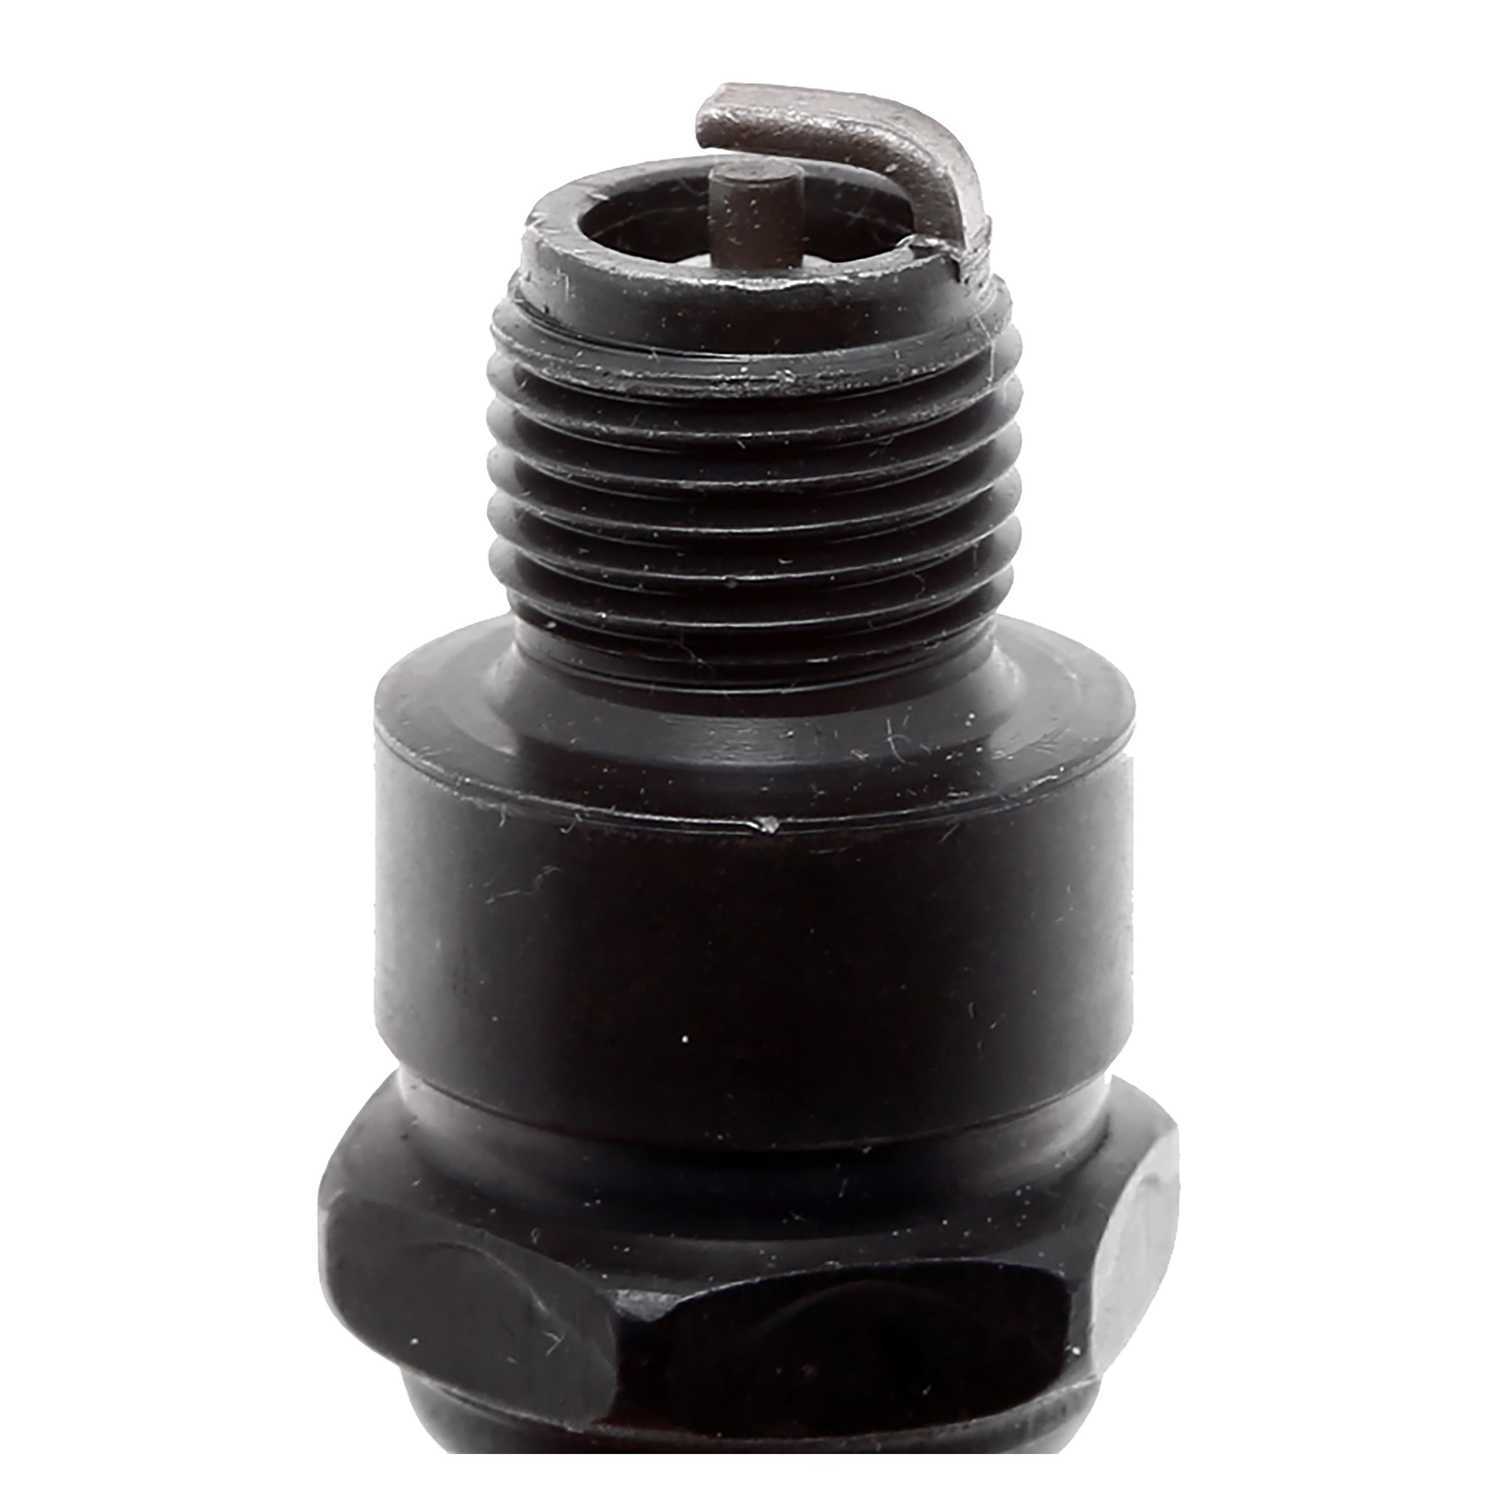 ACDELCO GOLD/PROFESSIONAL - Conventional Spark Plug - DCC R44F